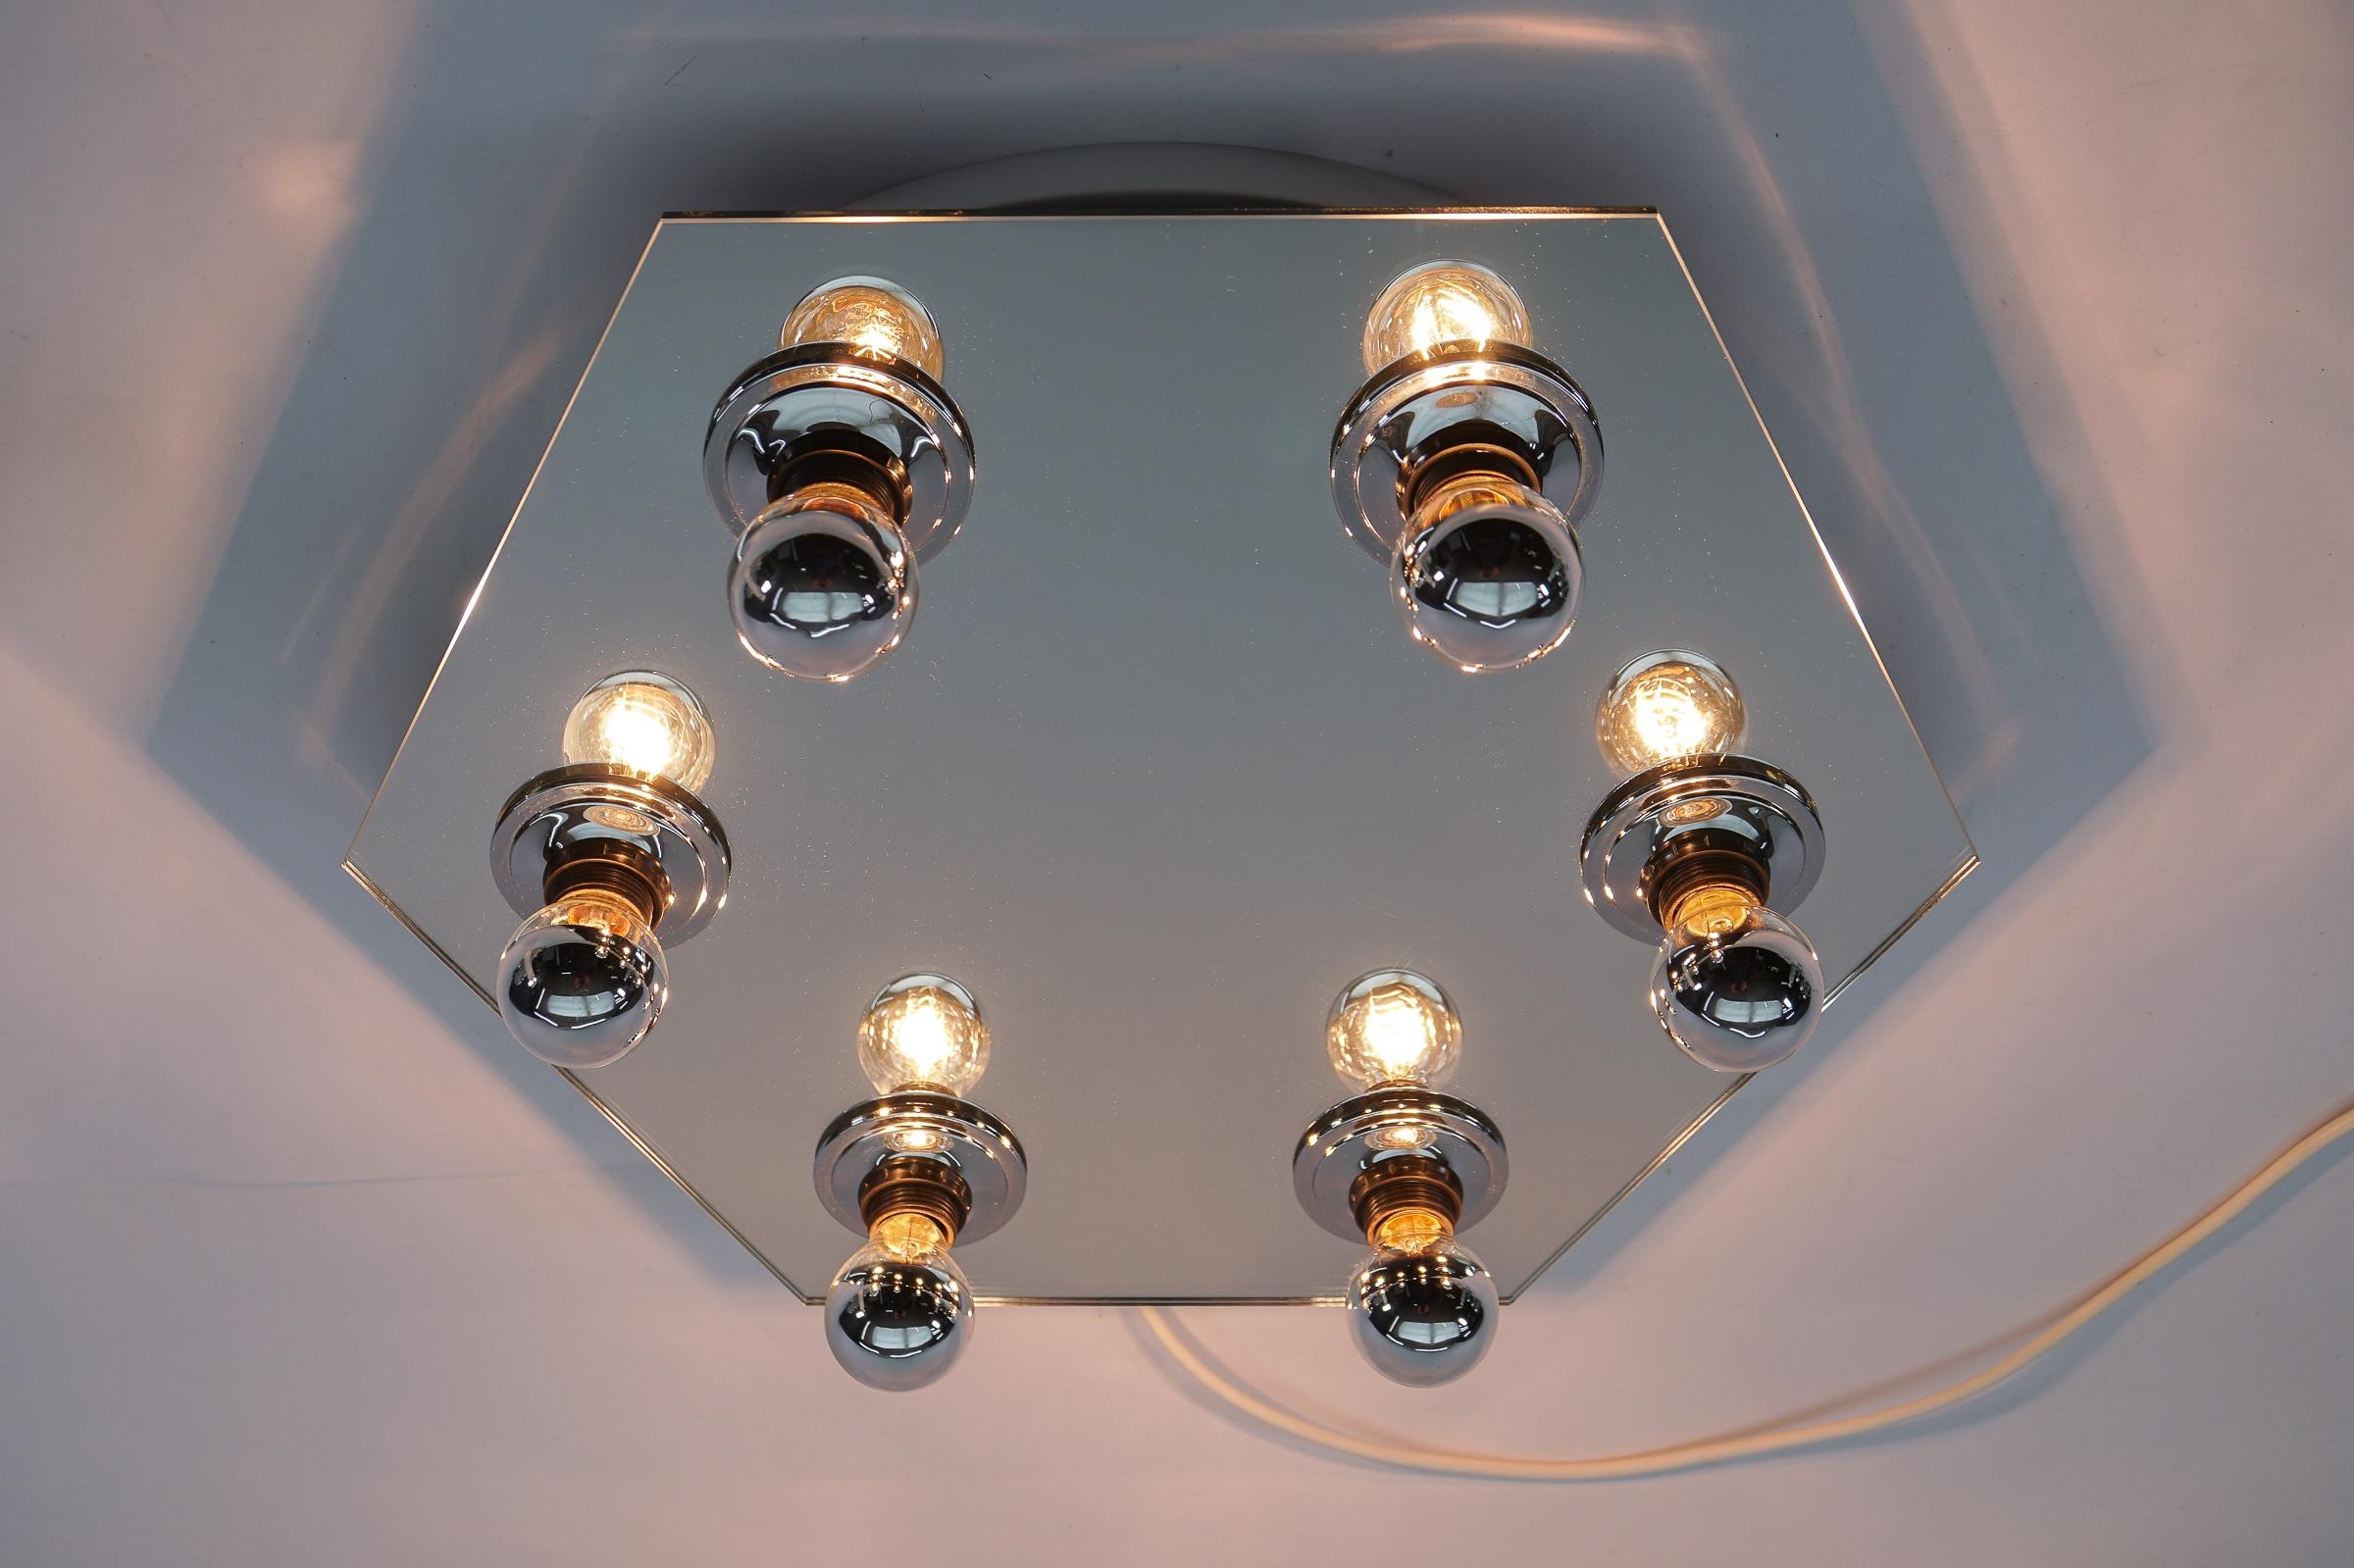 Hexagonal Mirrored Ceiling Lamp With Six Light Bulbs, 1970s Italy In Good Condition For Sale In Nürnberg, Bayern